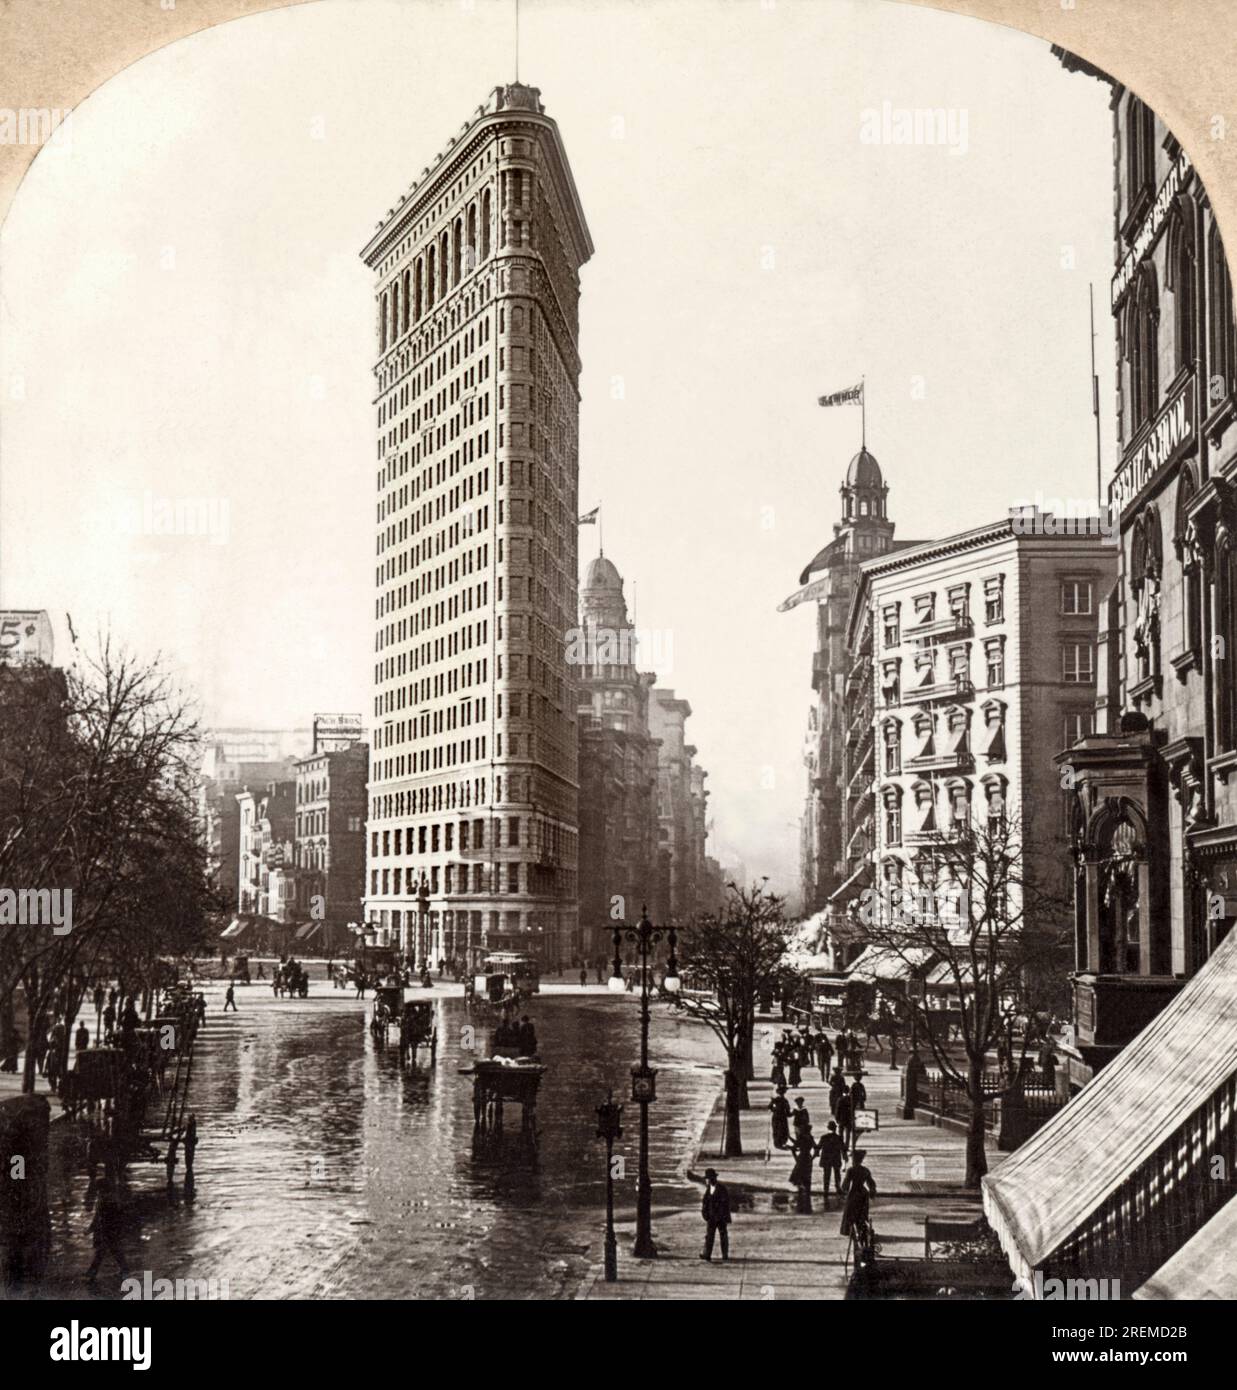 New York, New York:  1903. The Flatiron Building (originally named the Fuller Building) at Fifth Avenue and Broadway at the south end of Madison Square in New York City. It is 22 stories tall and was designed by Daniel Burnham. Stock Photo